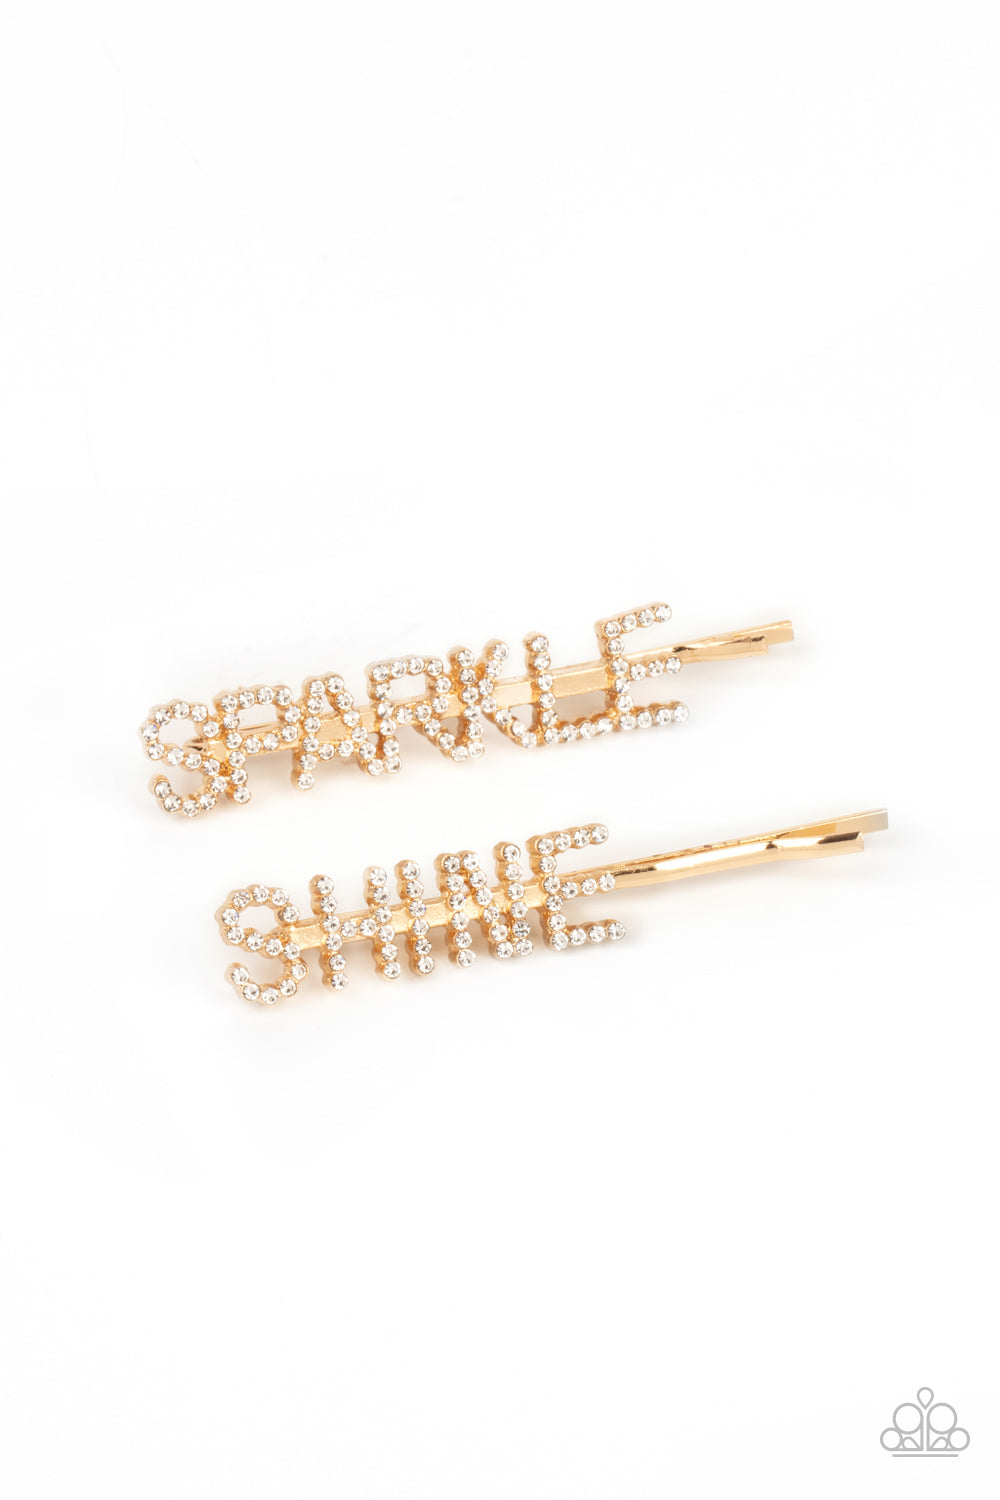 Paparazzi Accessories - Center of the SPARKLE-verse #HB33  - Gold Hair Pin